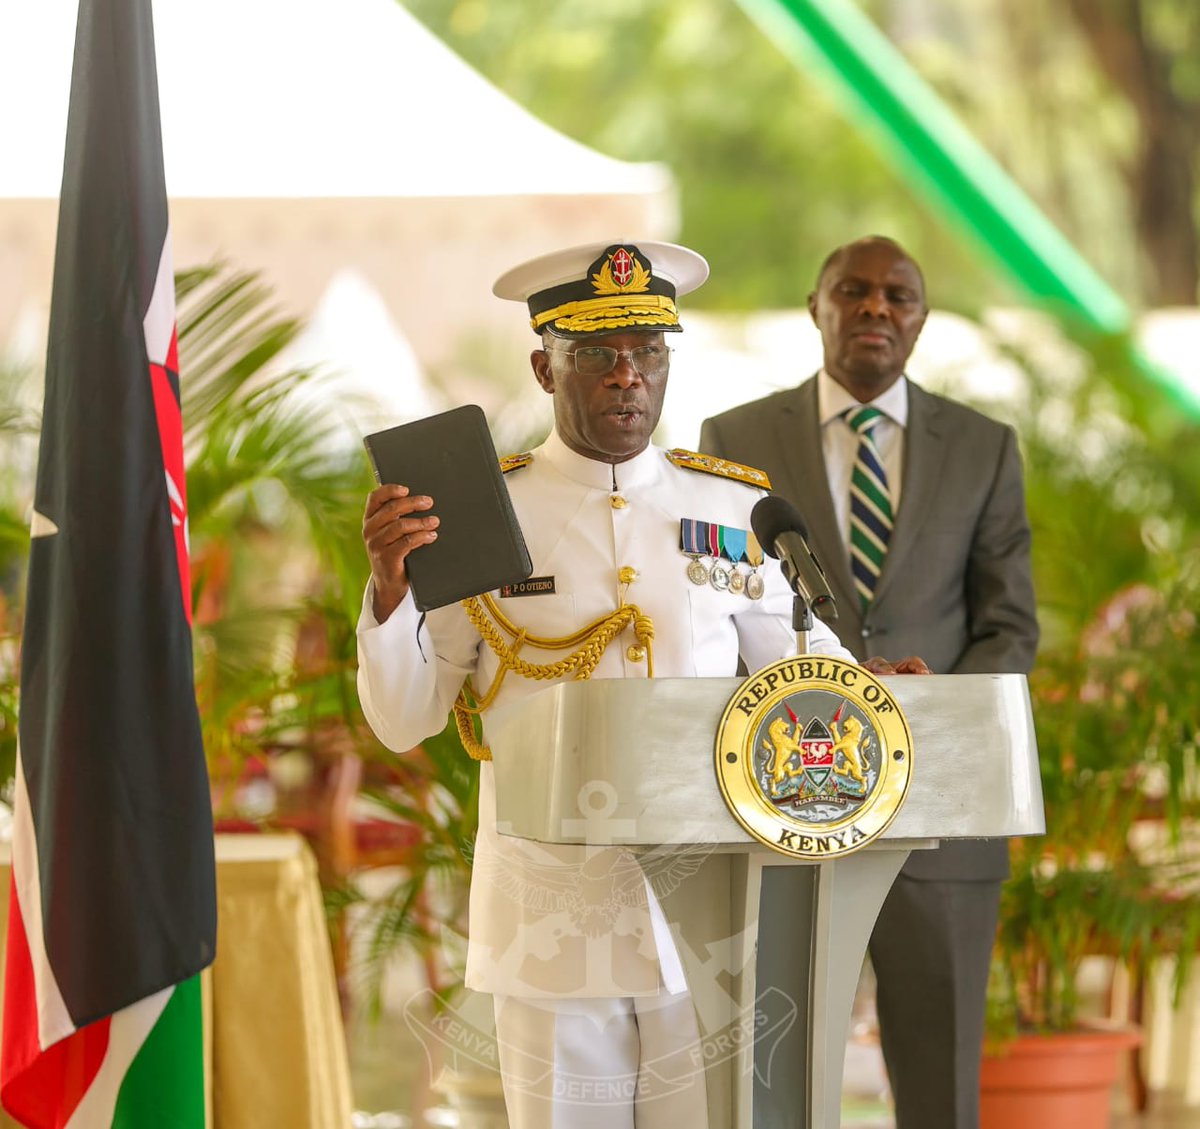 H.E Hon Dr William Samoei Ruto, President of the Republic of Kenya, and Commander-in-Chief of the Defence Forces today presided over the investiture of ranks and swearing in of newly promoted and appointed KDF General Officers at State House, Nairobi. bit.ly/3UtNzhh